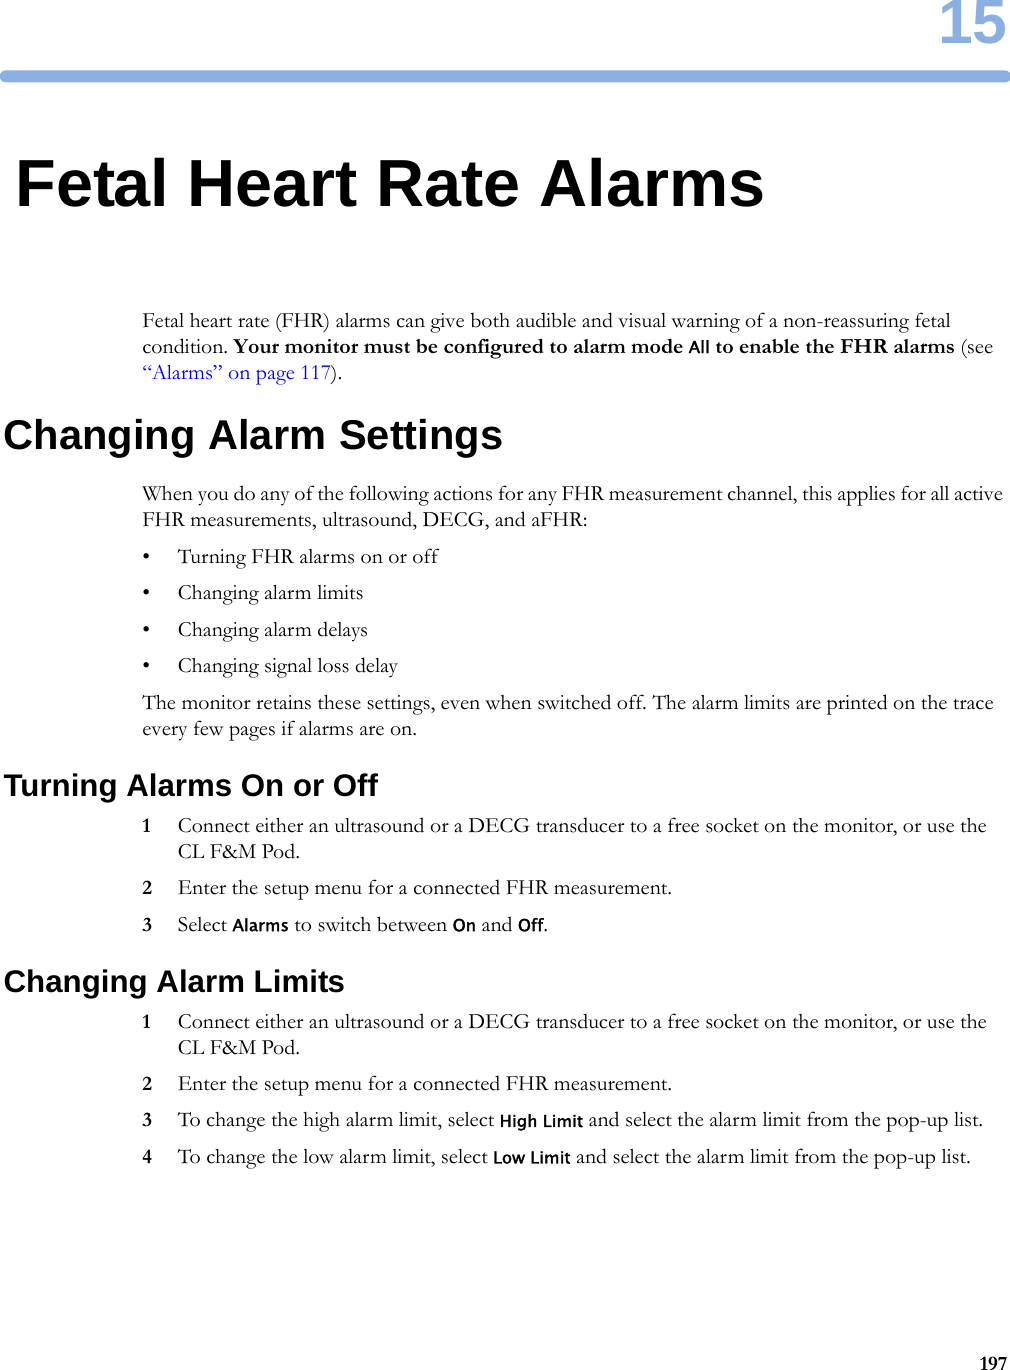 1519715Fetal Heart Rate AlarmsFetal heart rate (FHR) alarms can give both audible and visual warning of a non-reassuring fetal condition. Your monitor must be configured to alarm mode All to enable the FHR alarms (see “Alarms” on page 117).Changing Alarm SettingsWhen you do any of the following actions for any FHR measurement channel, this applies for all active FHR measurements, ultrasound, DECG, and aFHR:• Turning FHR alarms on or off• Changing alarm limits• Changing alarm delays• Changing signal loss delayThe monitor retains these settings, even when switched off. The alarm limits are printed on the trace every few pages if alarms are on.Turning Alarms On or Off1Connect either an ultrasound or a DECG transducer to a free socket on the monitor, or use the CL F&amp;M Pod.2Enter the setup menu for a connected FHR measurement.3Select Alarms to switch between On and Off.Changing Alarm Limits1Connect either an ultrasound or a DECG transducer to a free socket on the monitor, or use the CL F&amp;M Pod.2Enter the setup menu for a connected FHR measurement.3To change the high alarm limit, select High Limit and select the alarm limit from the pop-up list.4To change the low alarm limit, select Low Limit and select the alarm limit from the pop-up list.